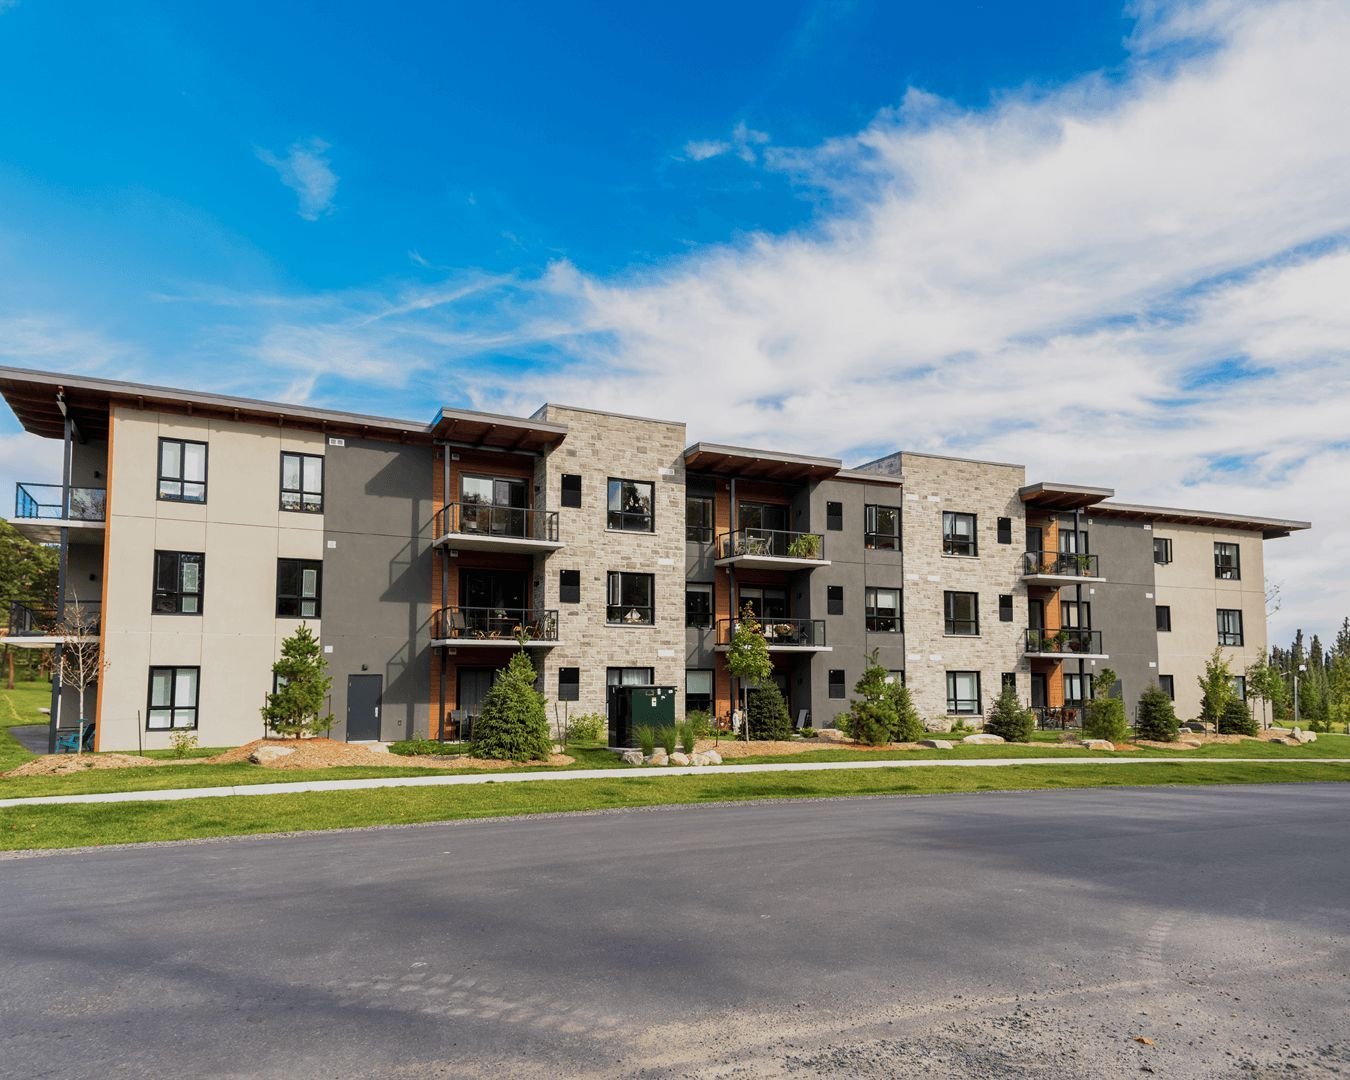 At Campus Trails, we're not just selling condos; we're offering a seamless blend of easy living, a connection to nature's beauty intertwined with a vibrant community. 

Come home to serenity, convenience and the warmth of neighbours who feel like che